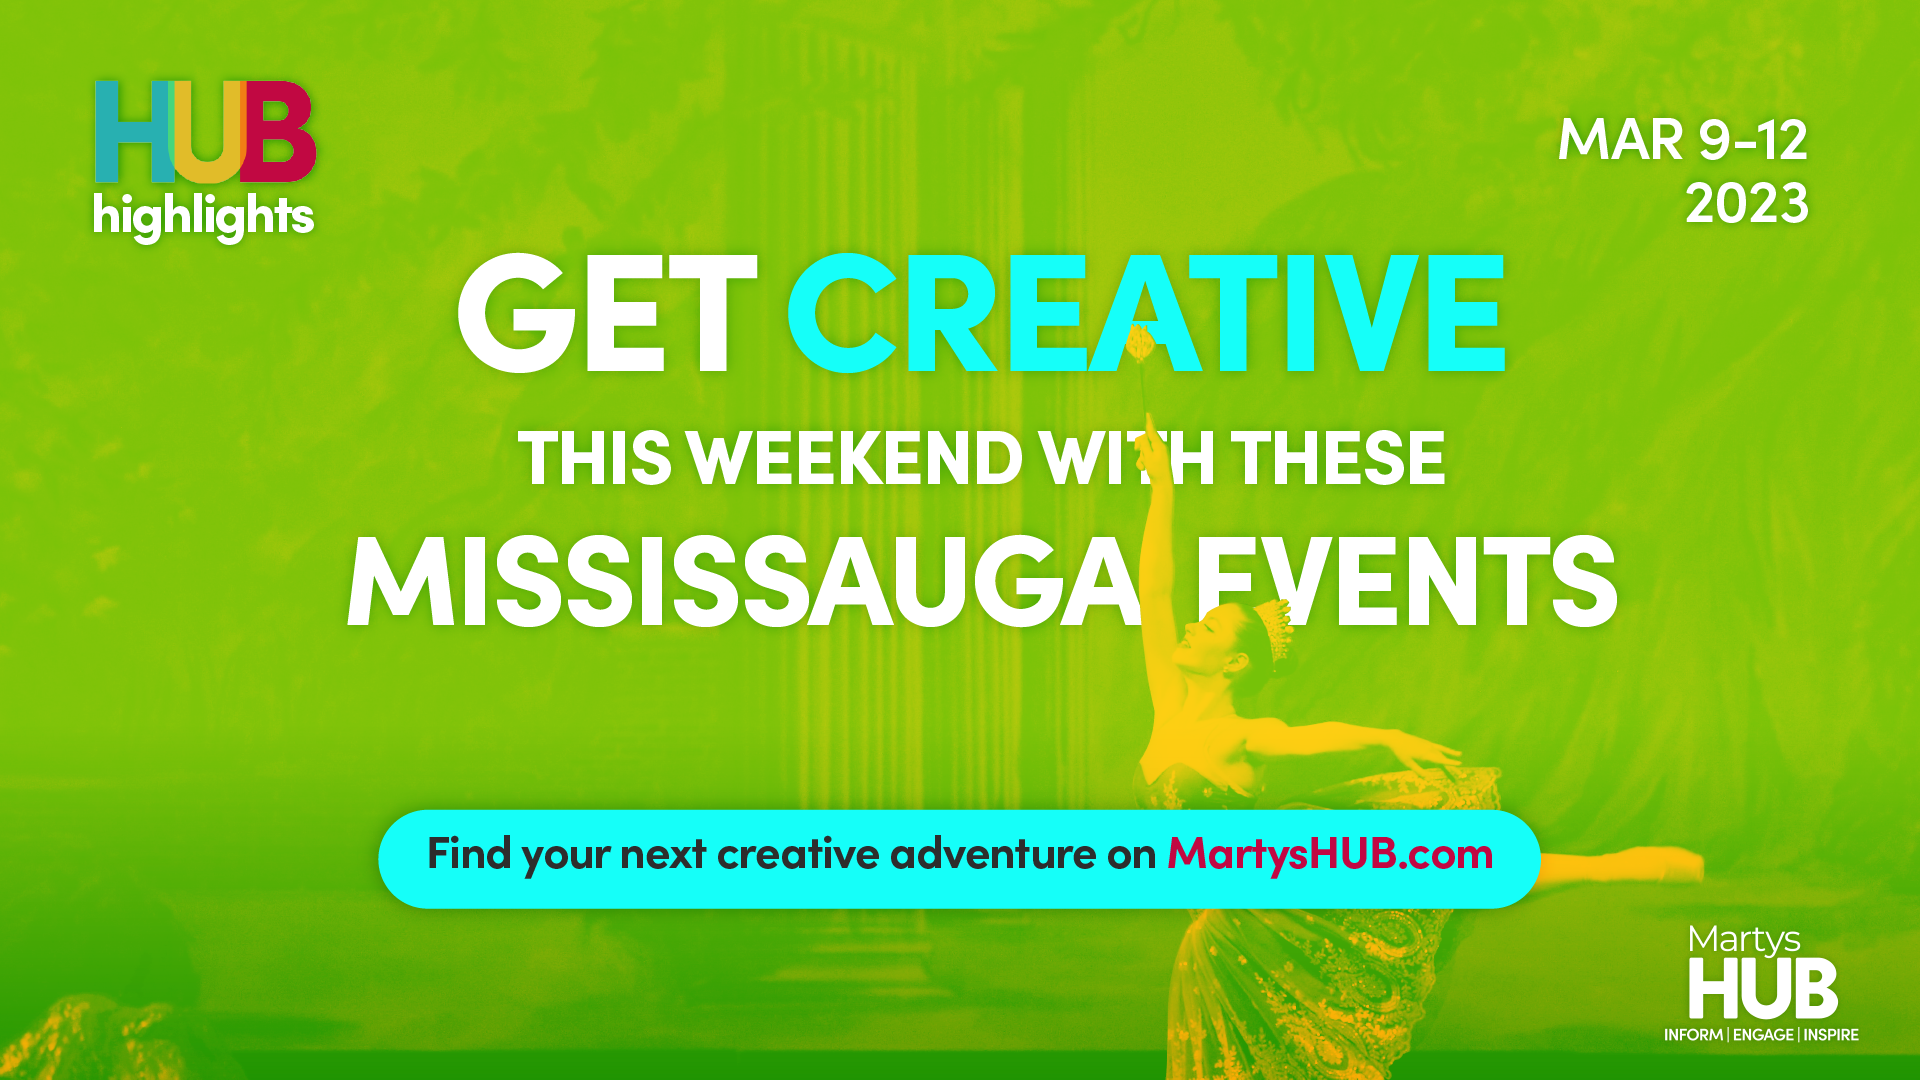 Get creative this weekend with these events in Mississauga (March 9-12)